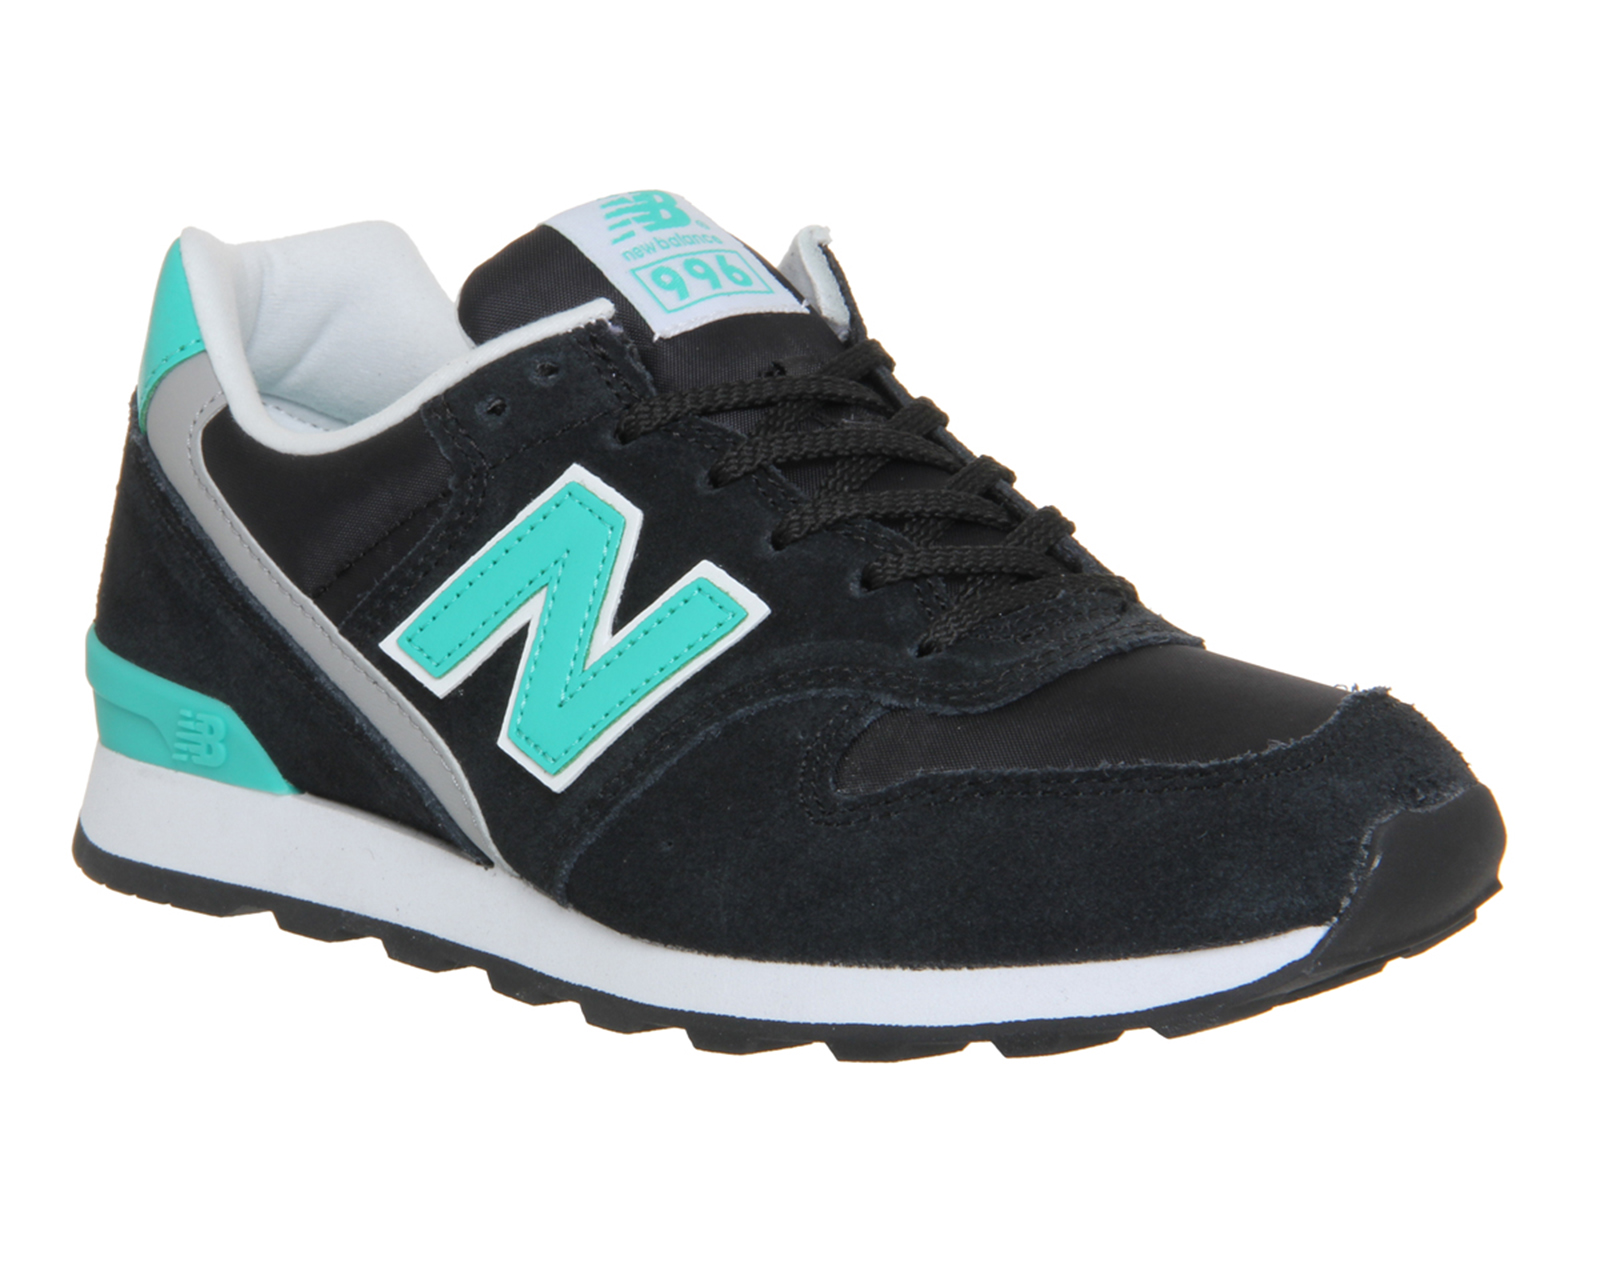 New Balance Wr996 Trainers Black Pool Green - Hers Exclusives